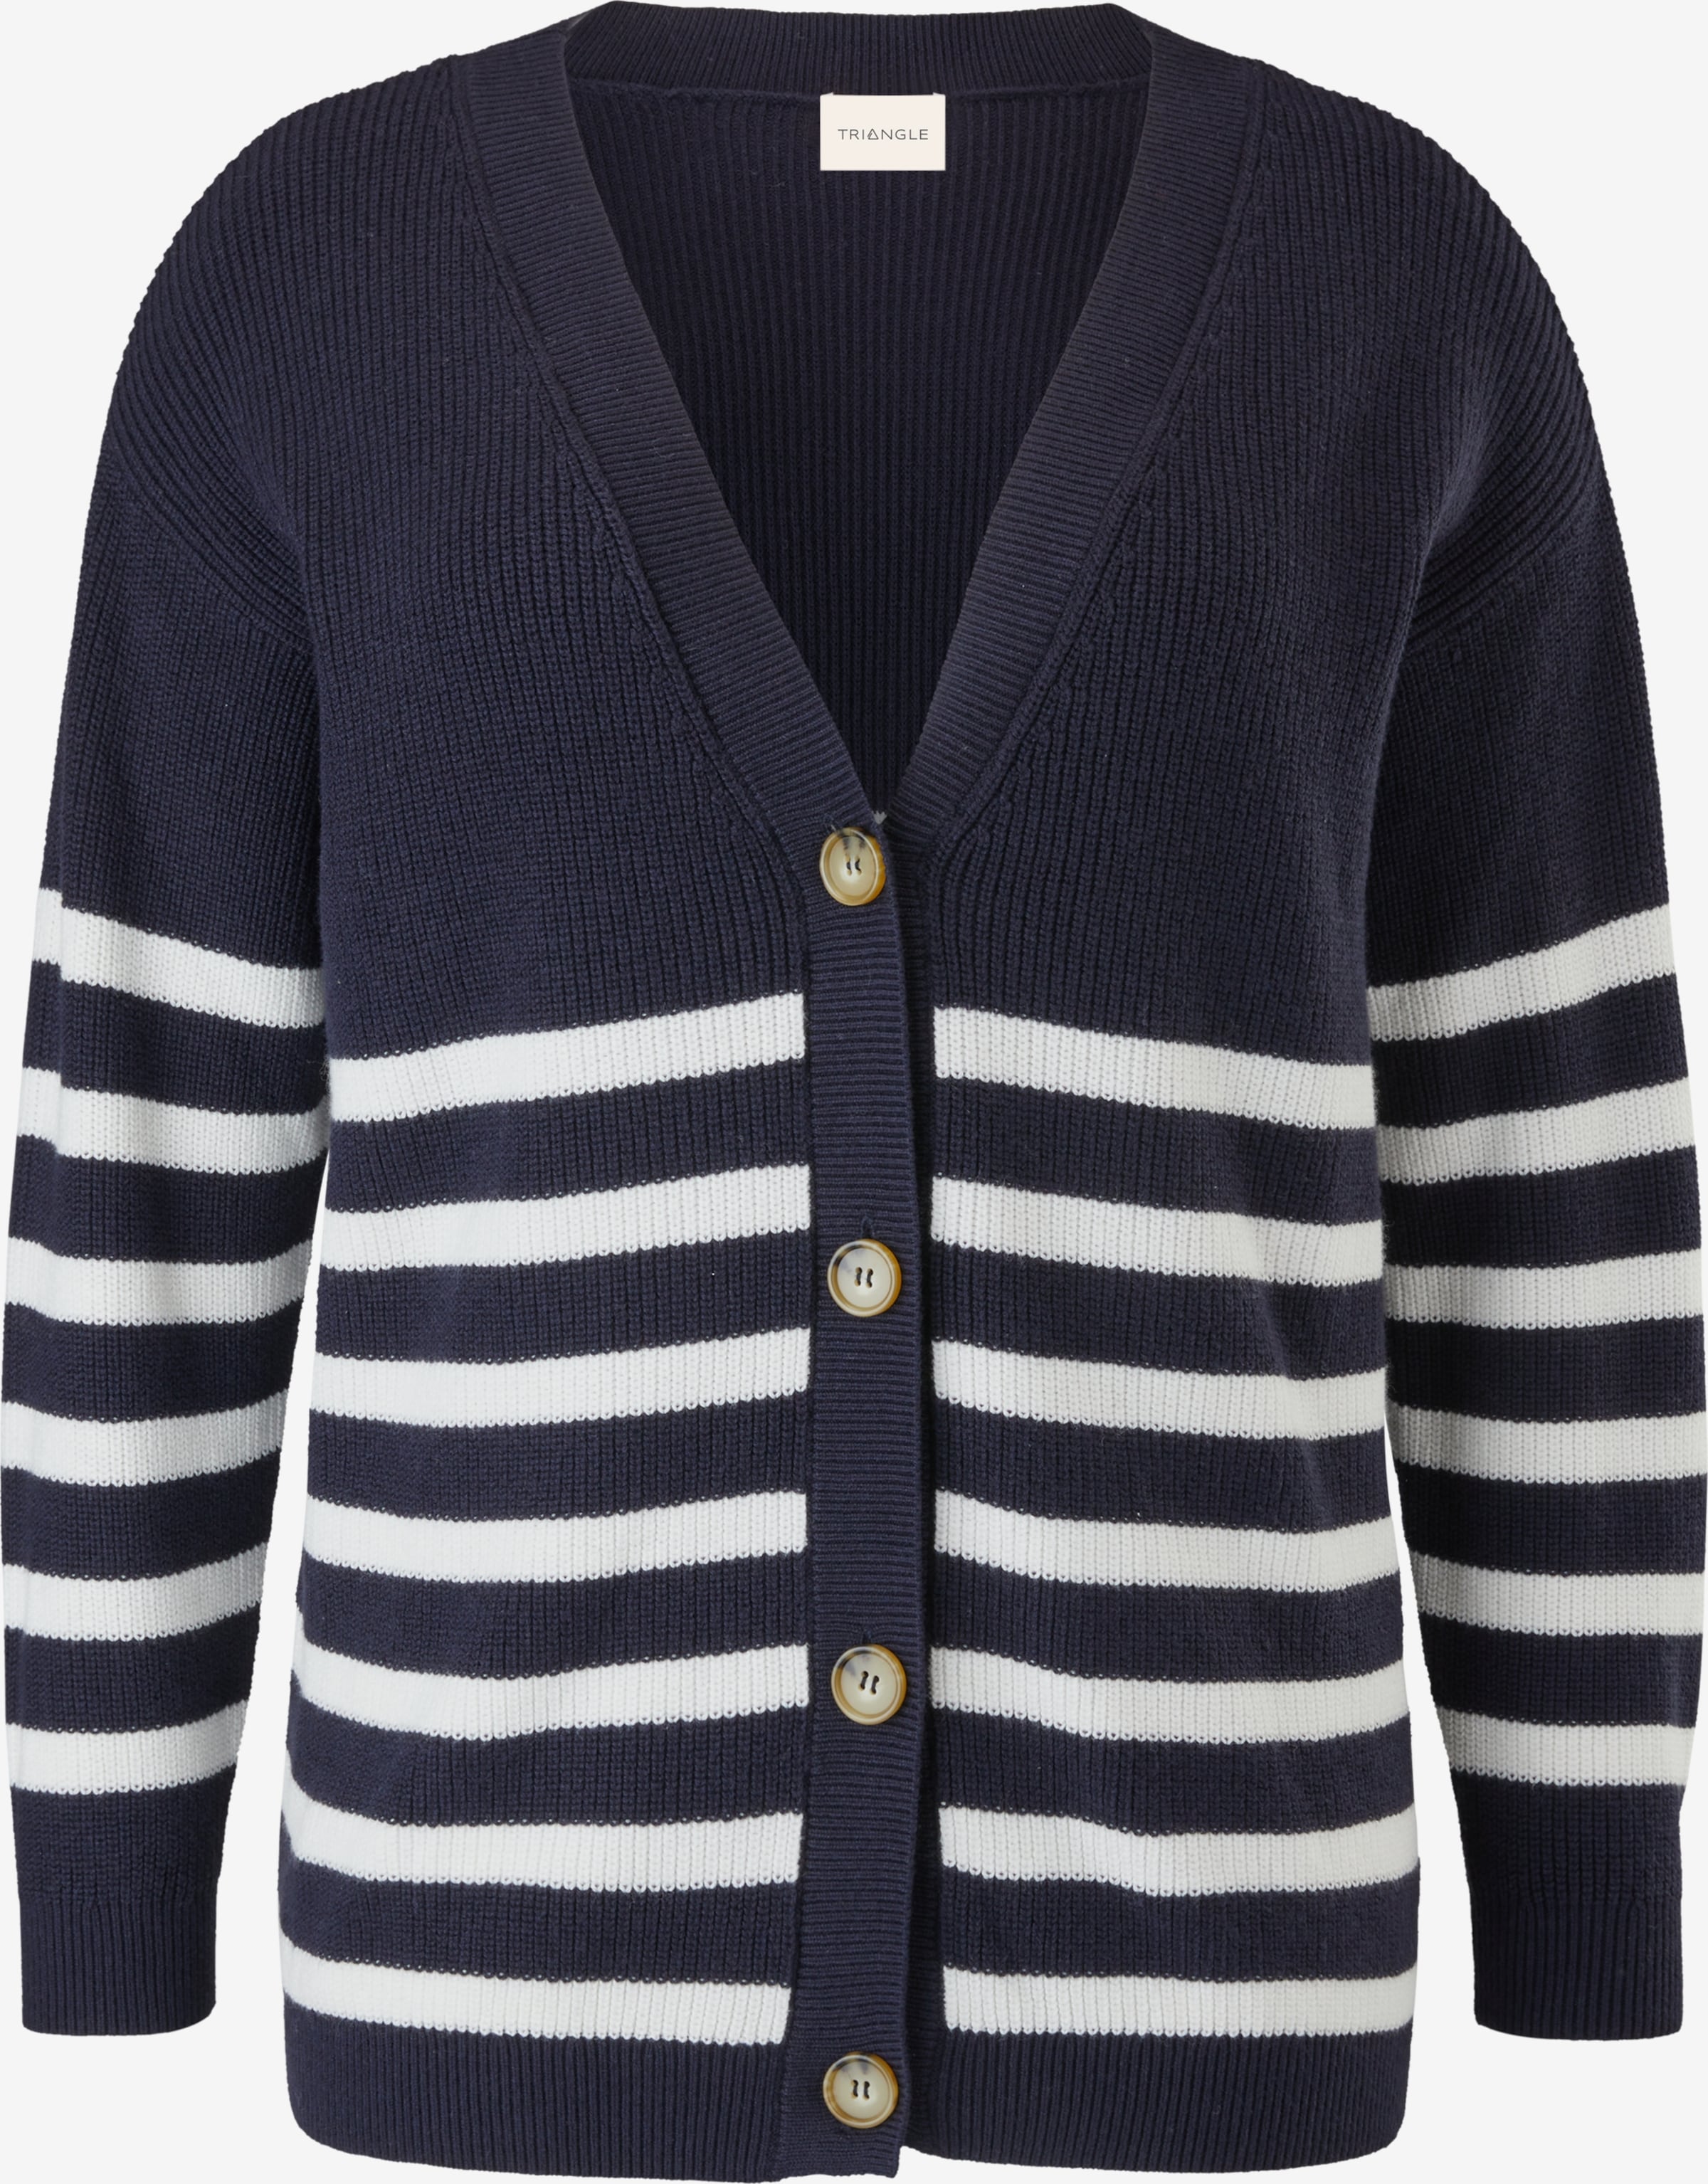 ABOUT in YOU | Navy Strickjacke TRIANGLE